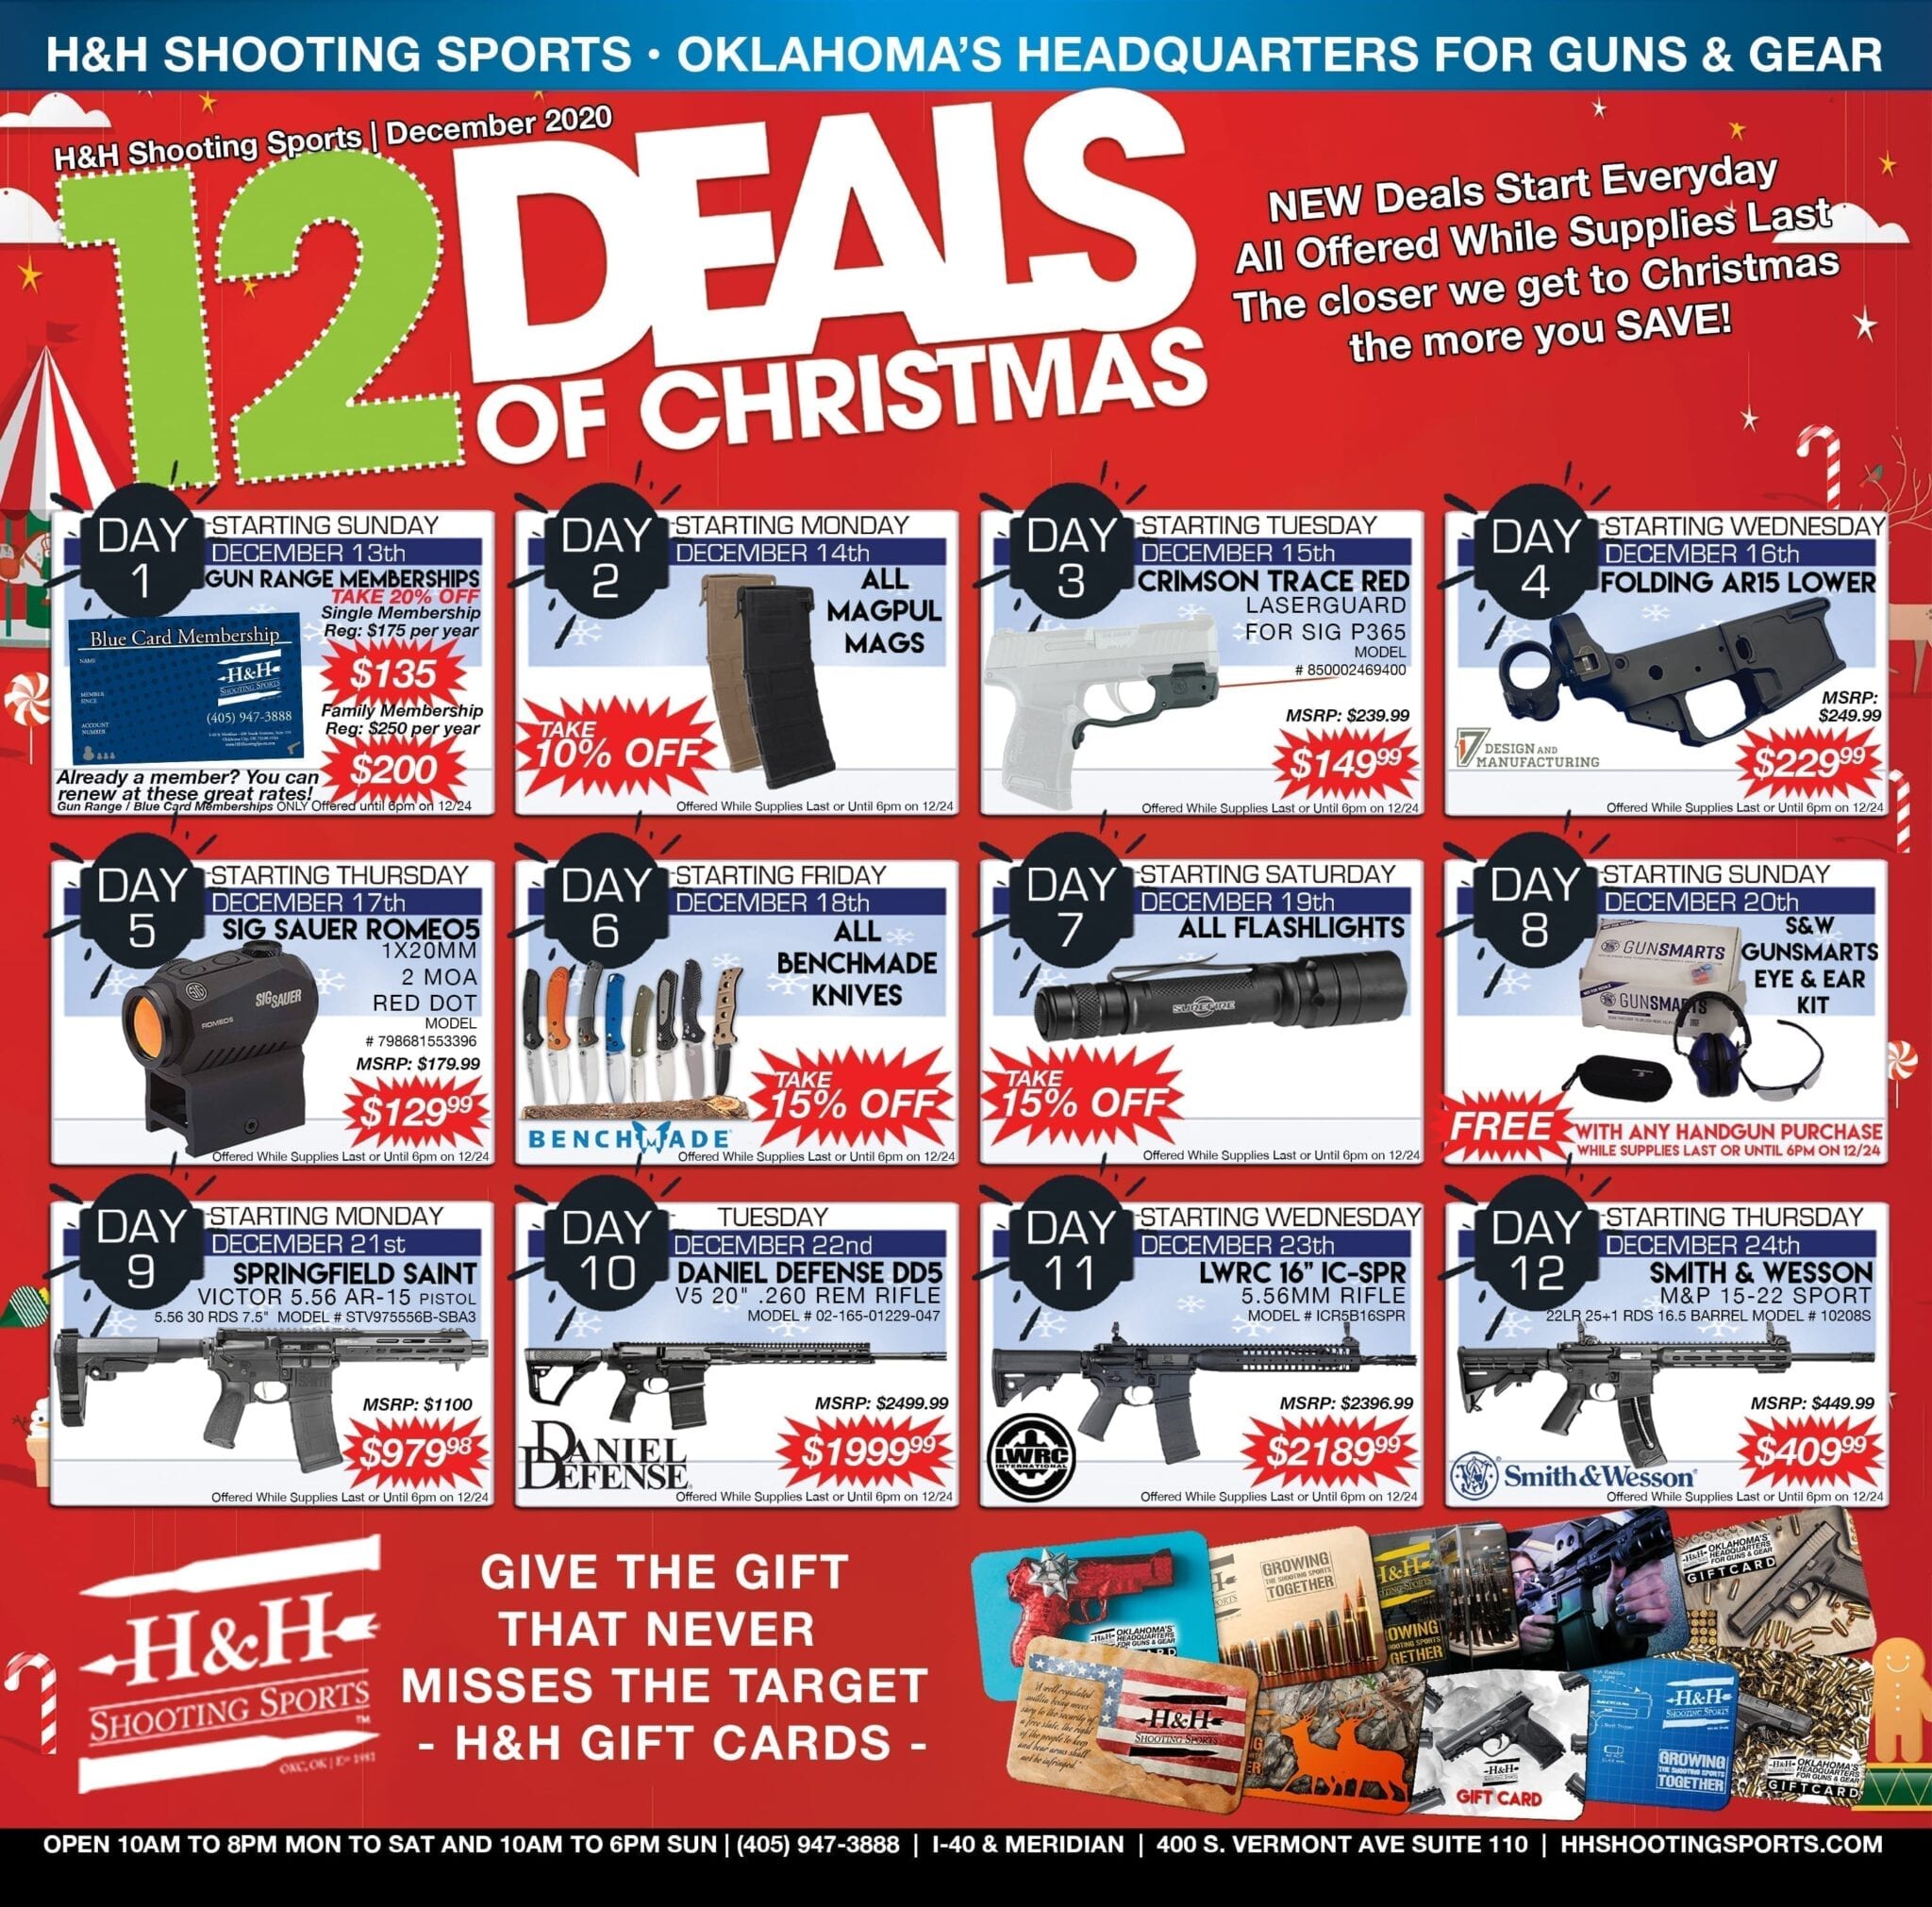 12 Deals of Christmas 2020 – H&H Shooting Sports